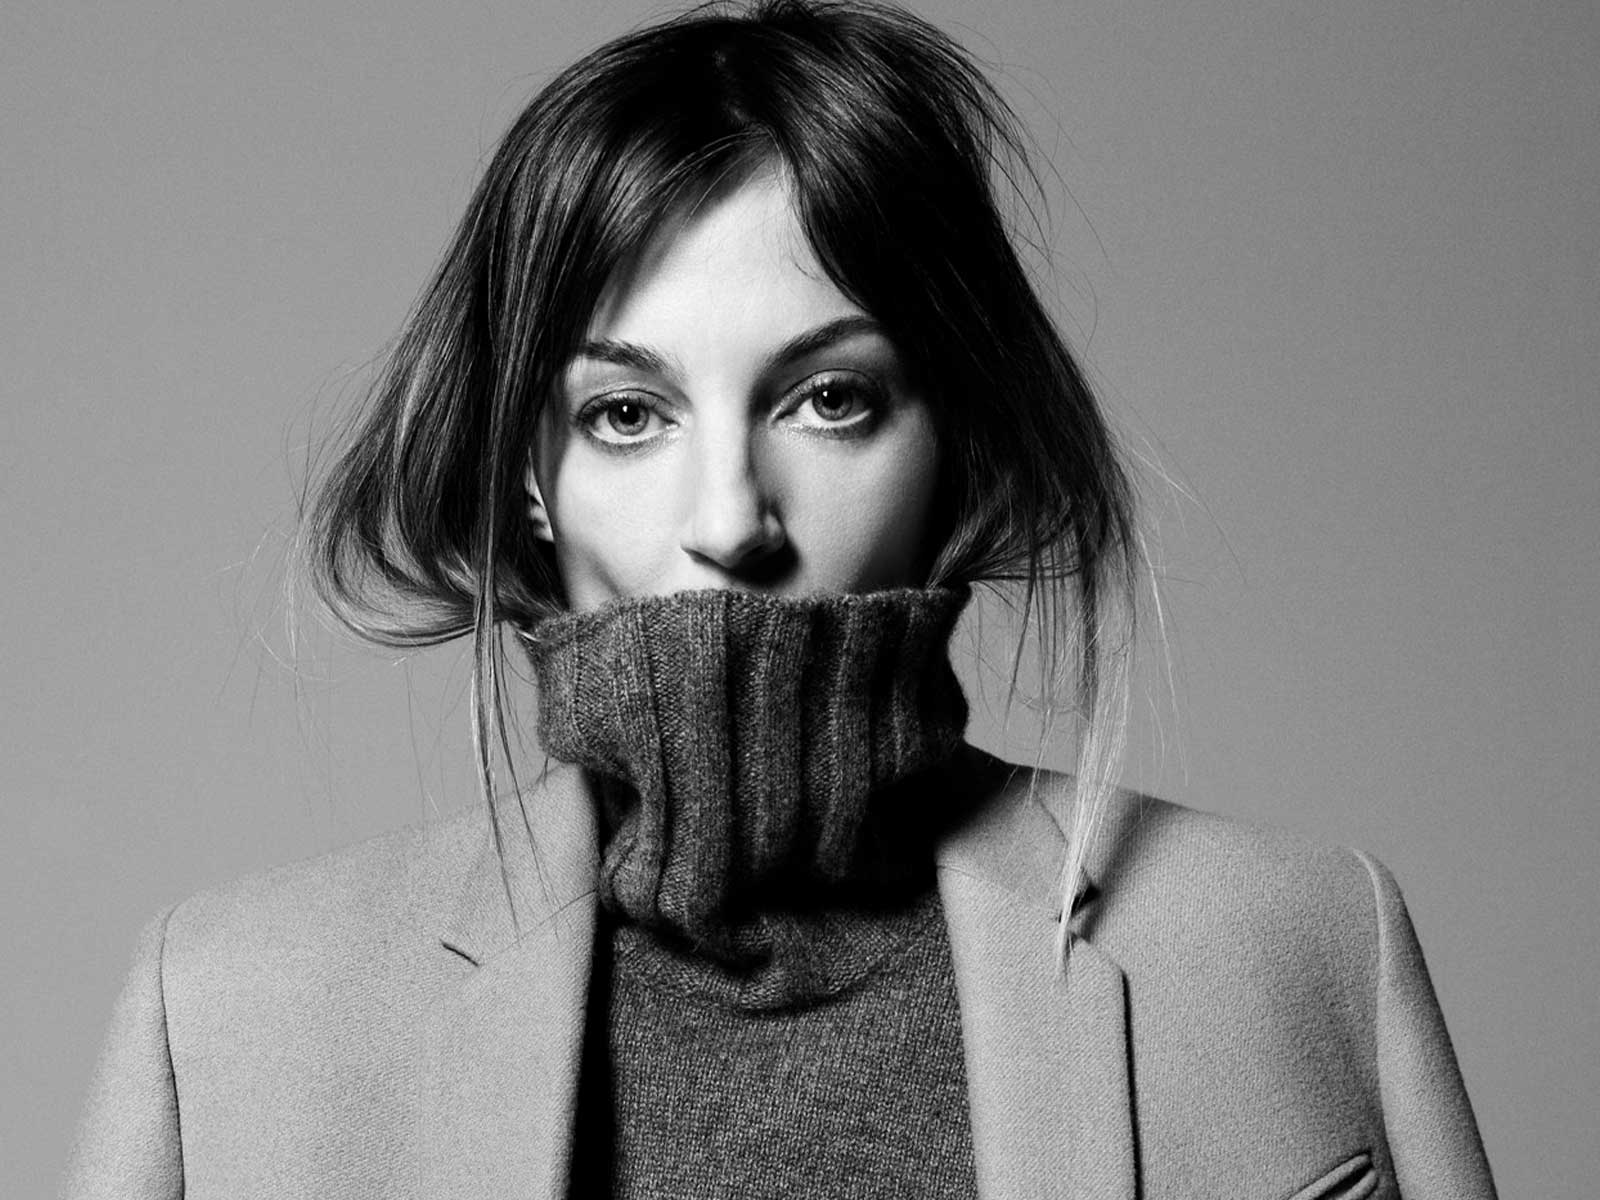 How Phoebe Philo's First Drop Missed the Mark